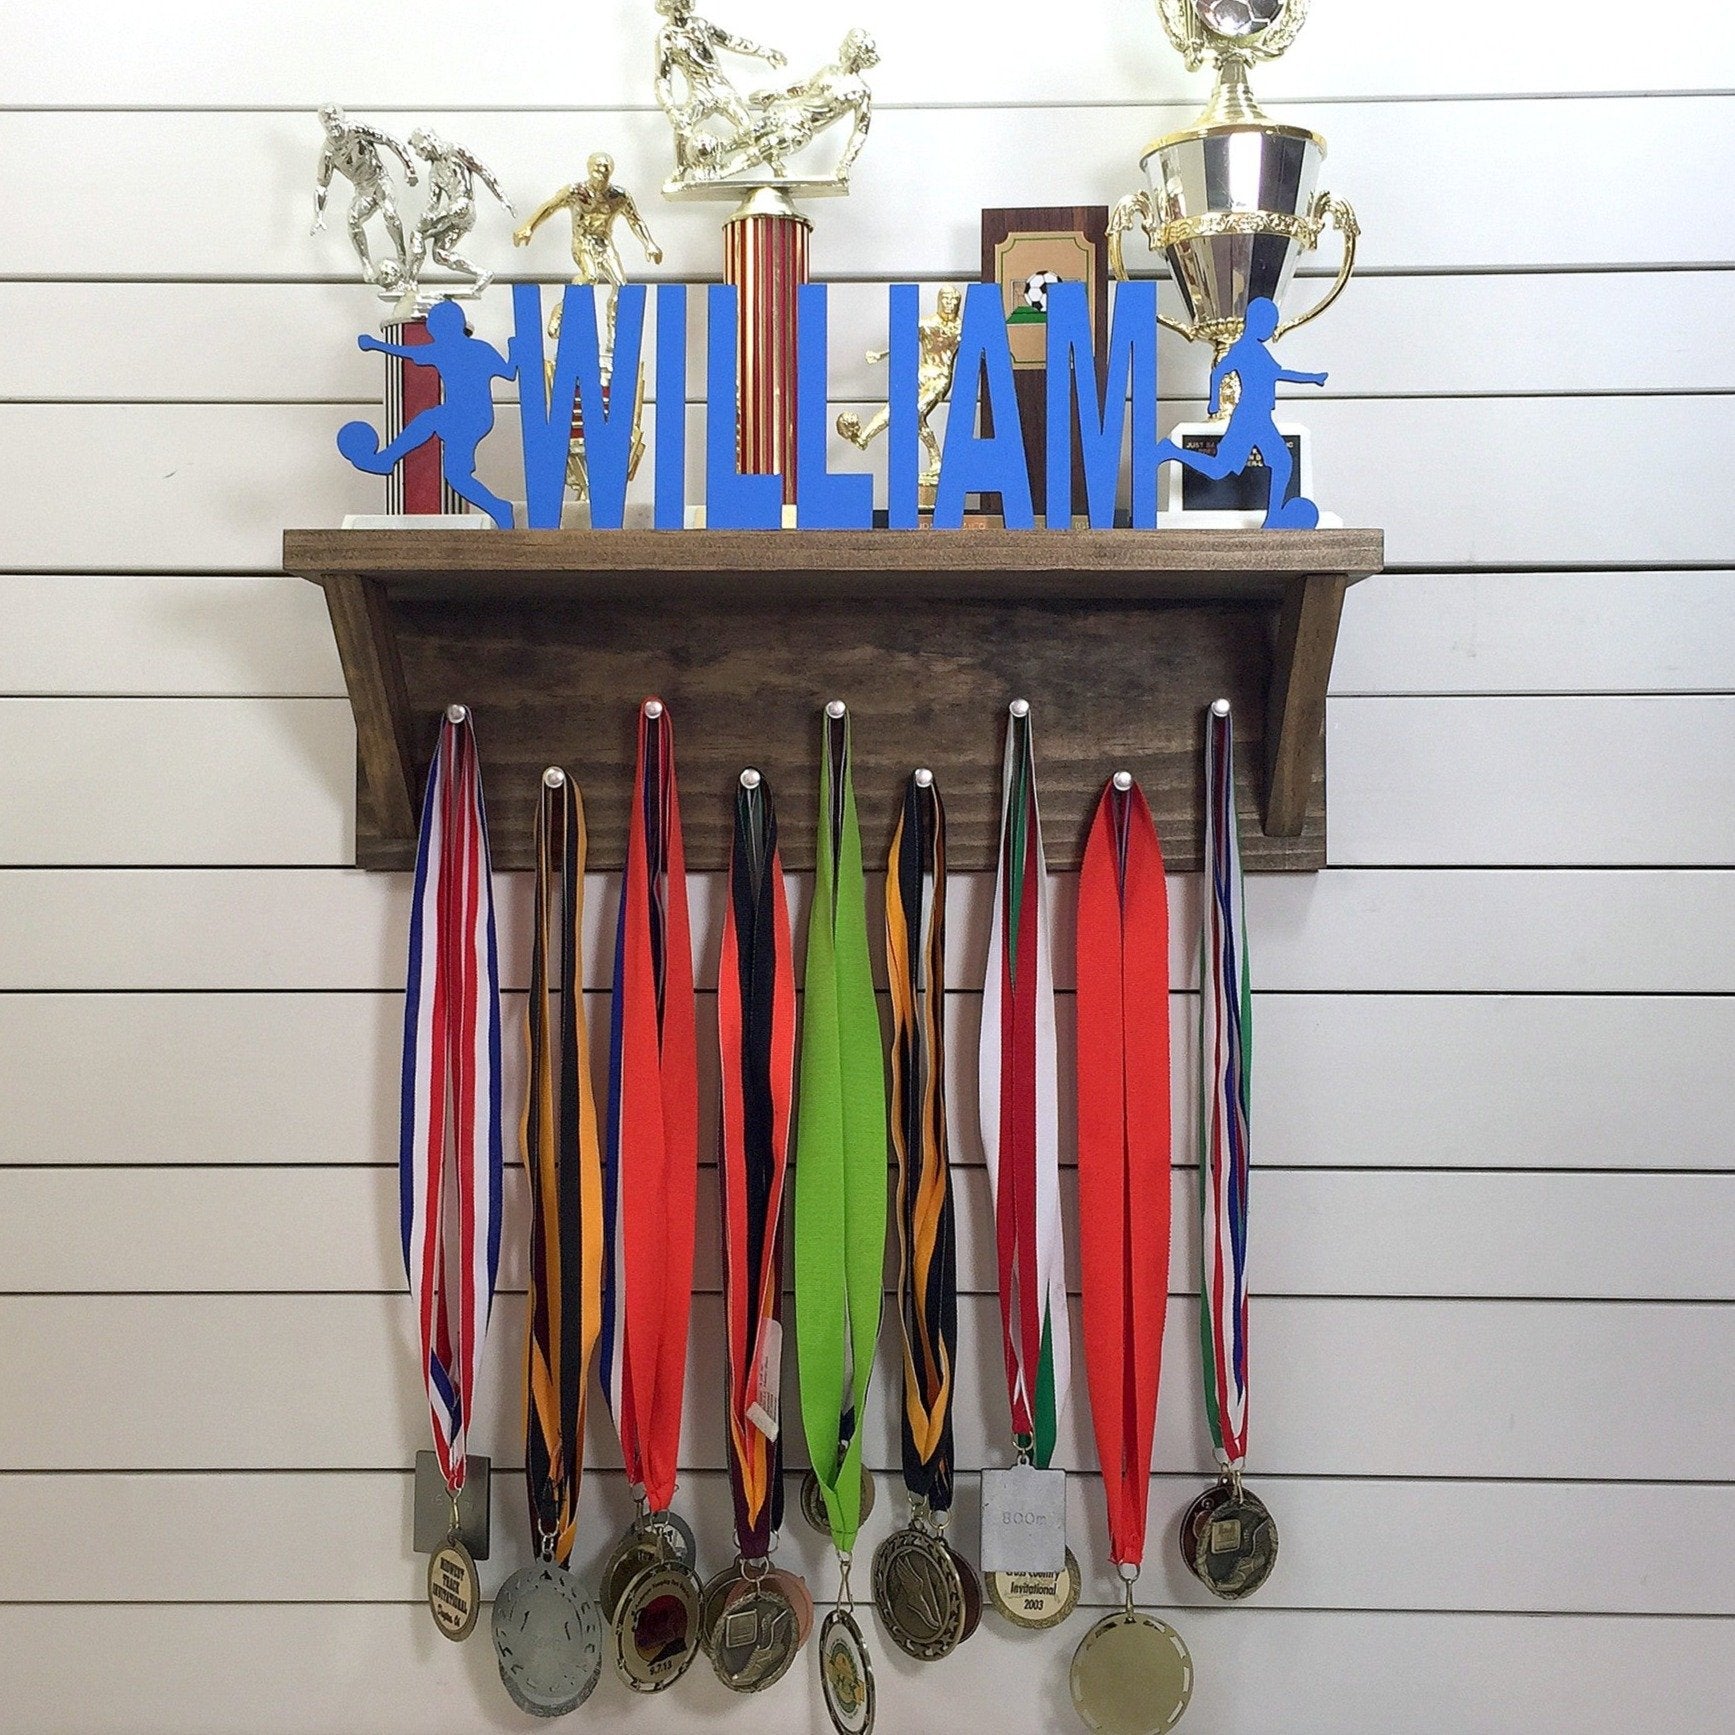 THE TROPHY CASE COLLECTION HAS NOW BEEN MADE SUPER EASY! GET FREE